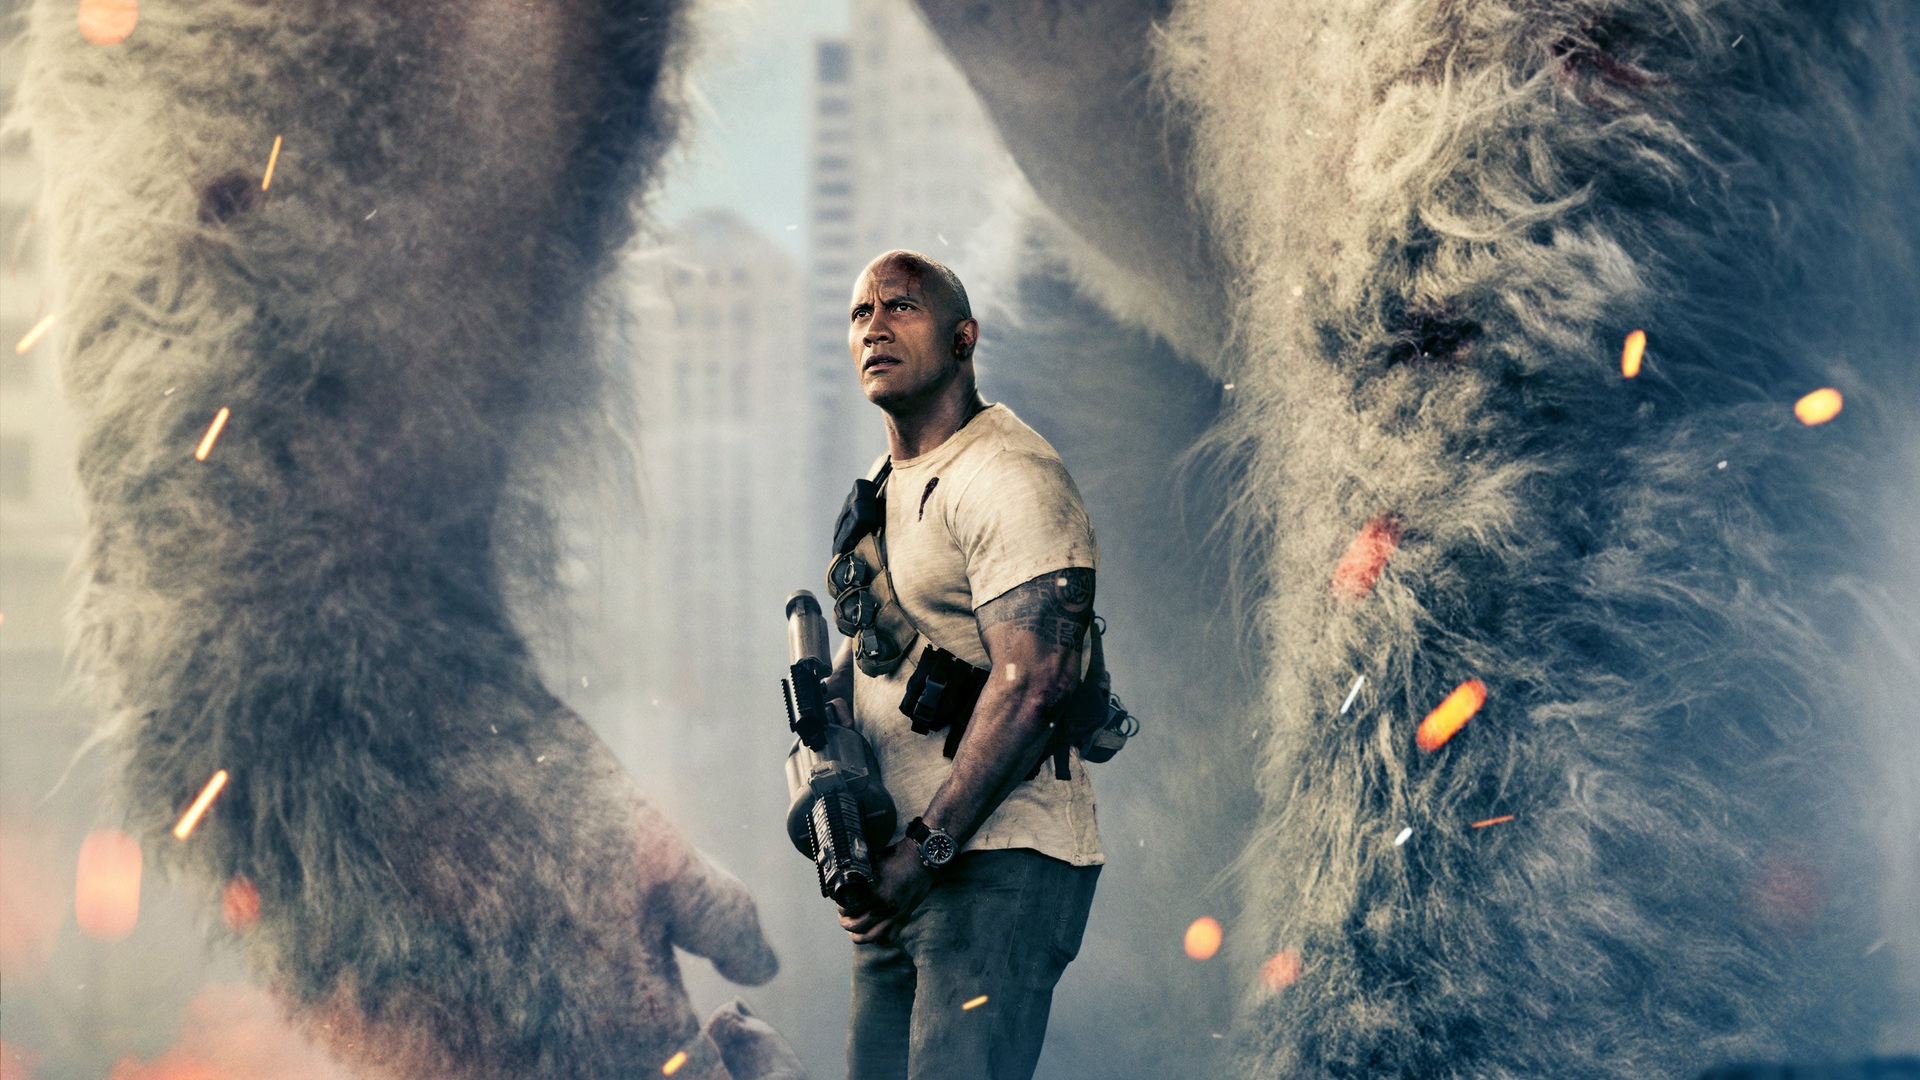 Rampage (2018) Picture